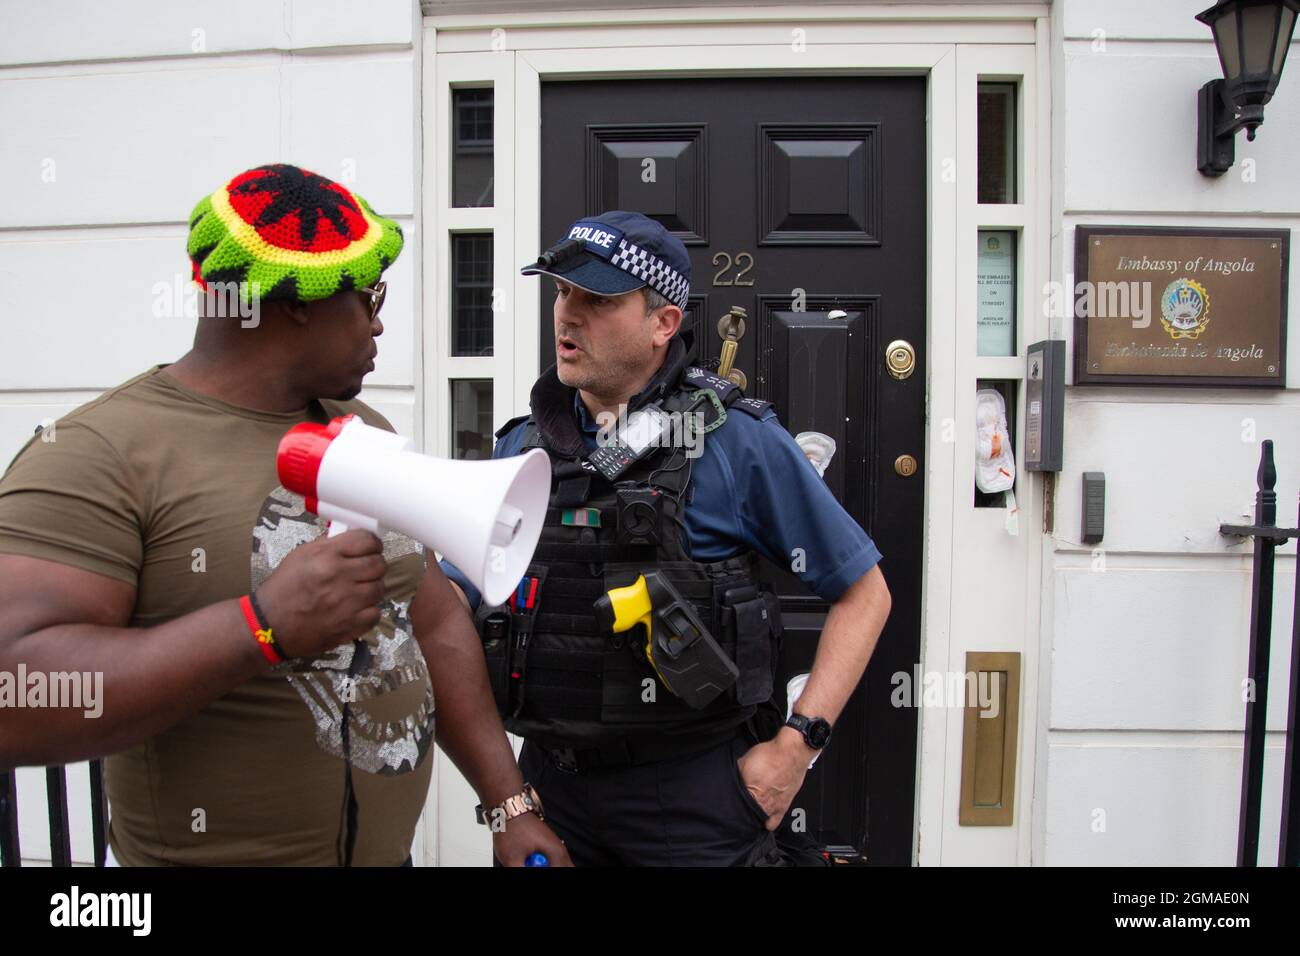 London, UK. 17th Sep, 2021. A police officer seen talking to a protester outside the Embassy of Angola during the demonstration.Activists held a protest against the rise of human rights Abuse, pedophilia and corruption in Angola. Credit: SOPA Images Limited/Alamy Live News Stock Photo